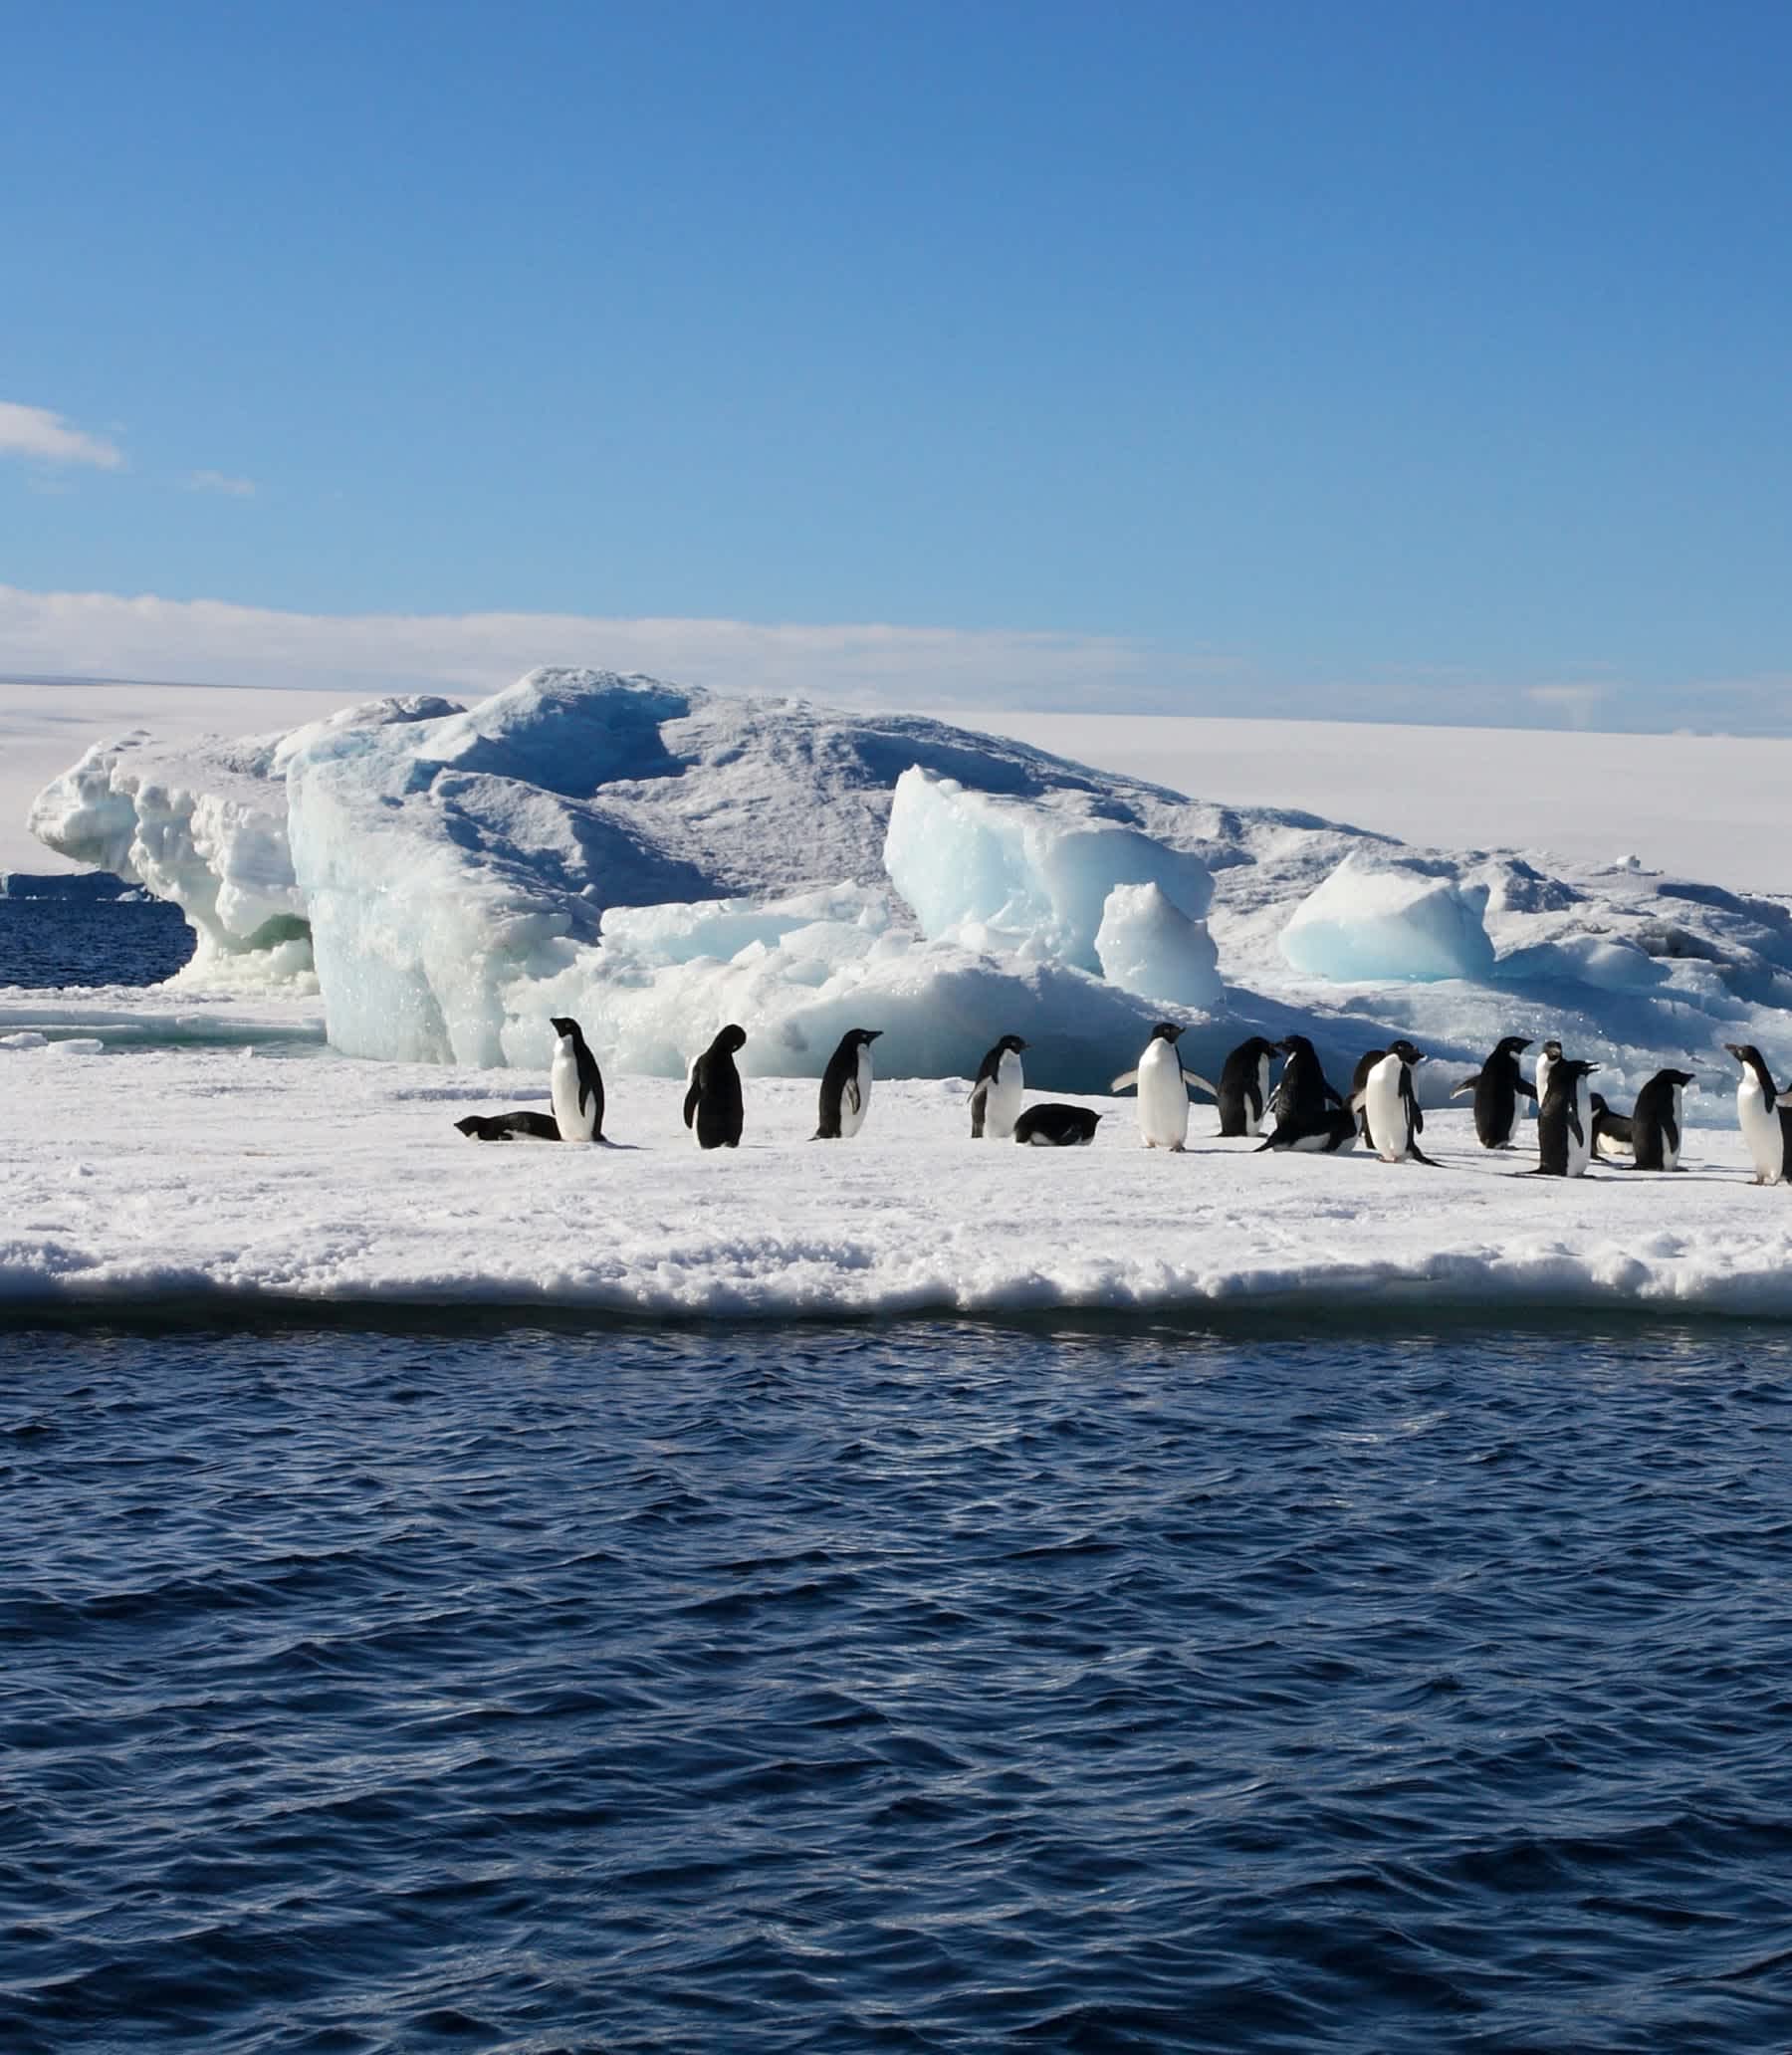 Penguins stand on ice floating in the sea